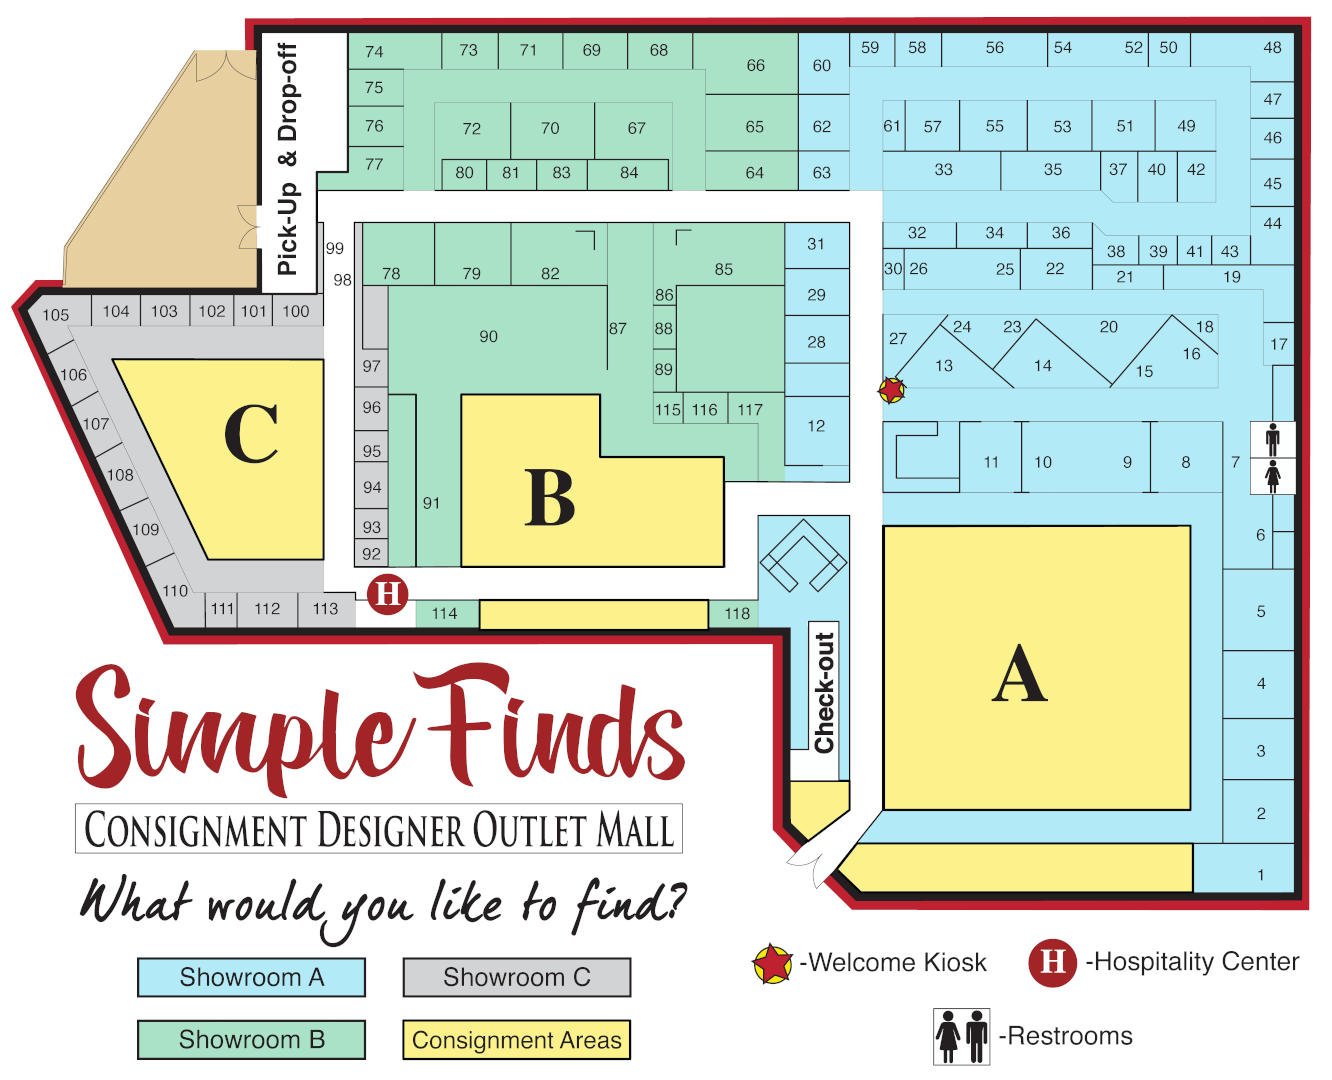 A Simple Find Consignment Outlet Mall - Store Map, 22 November